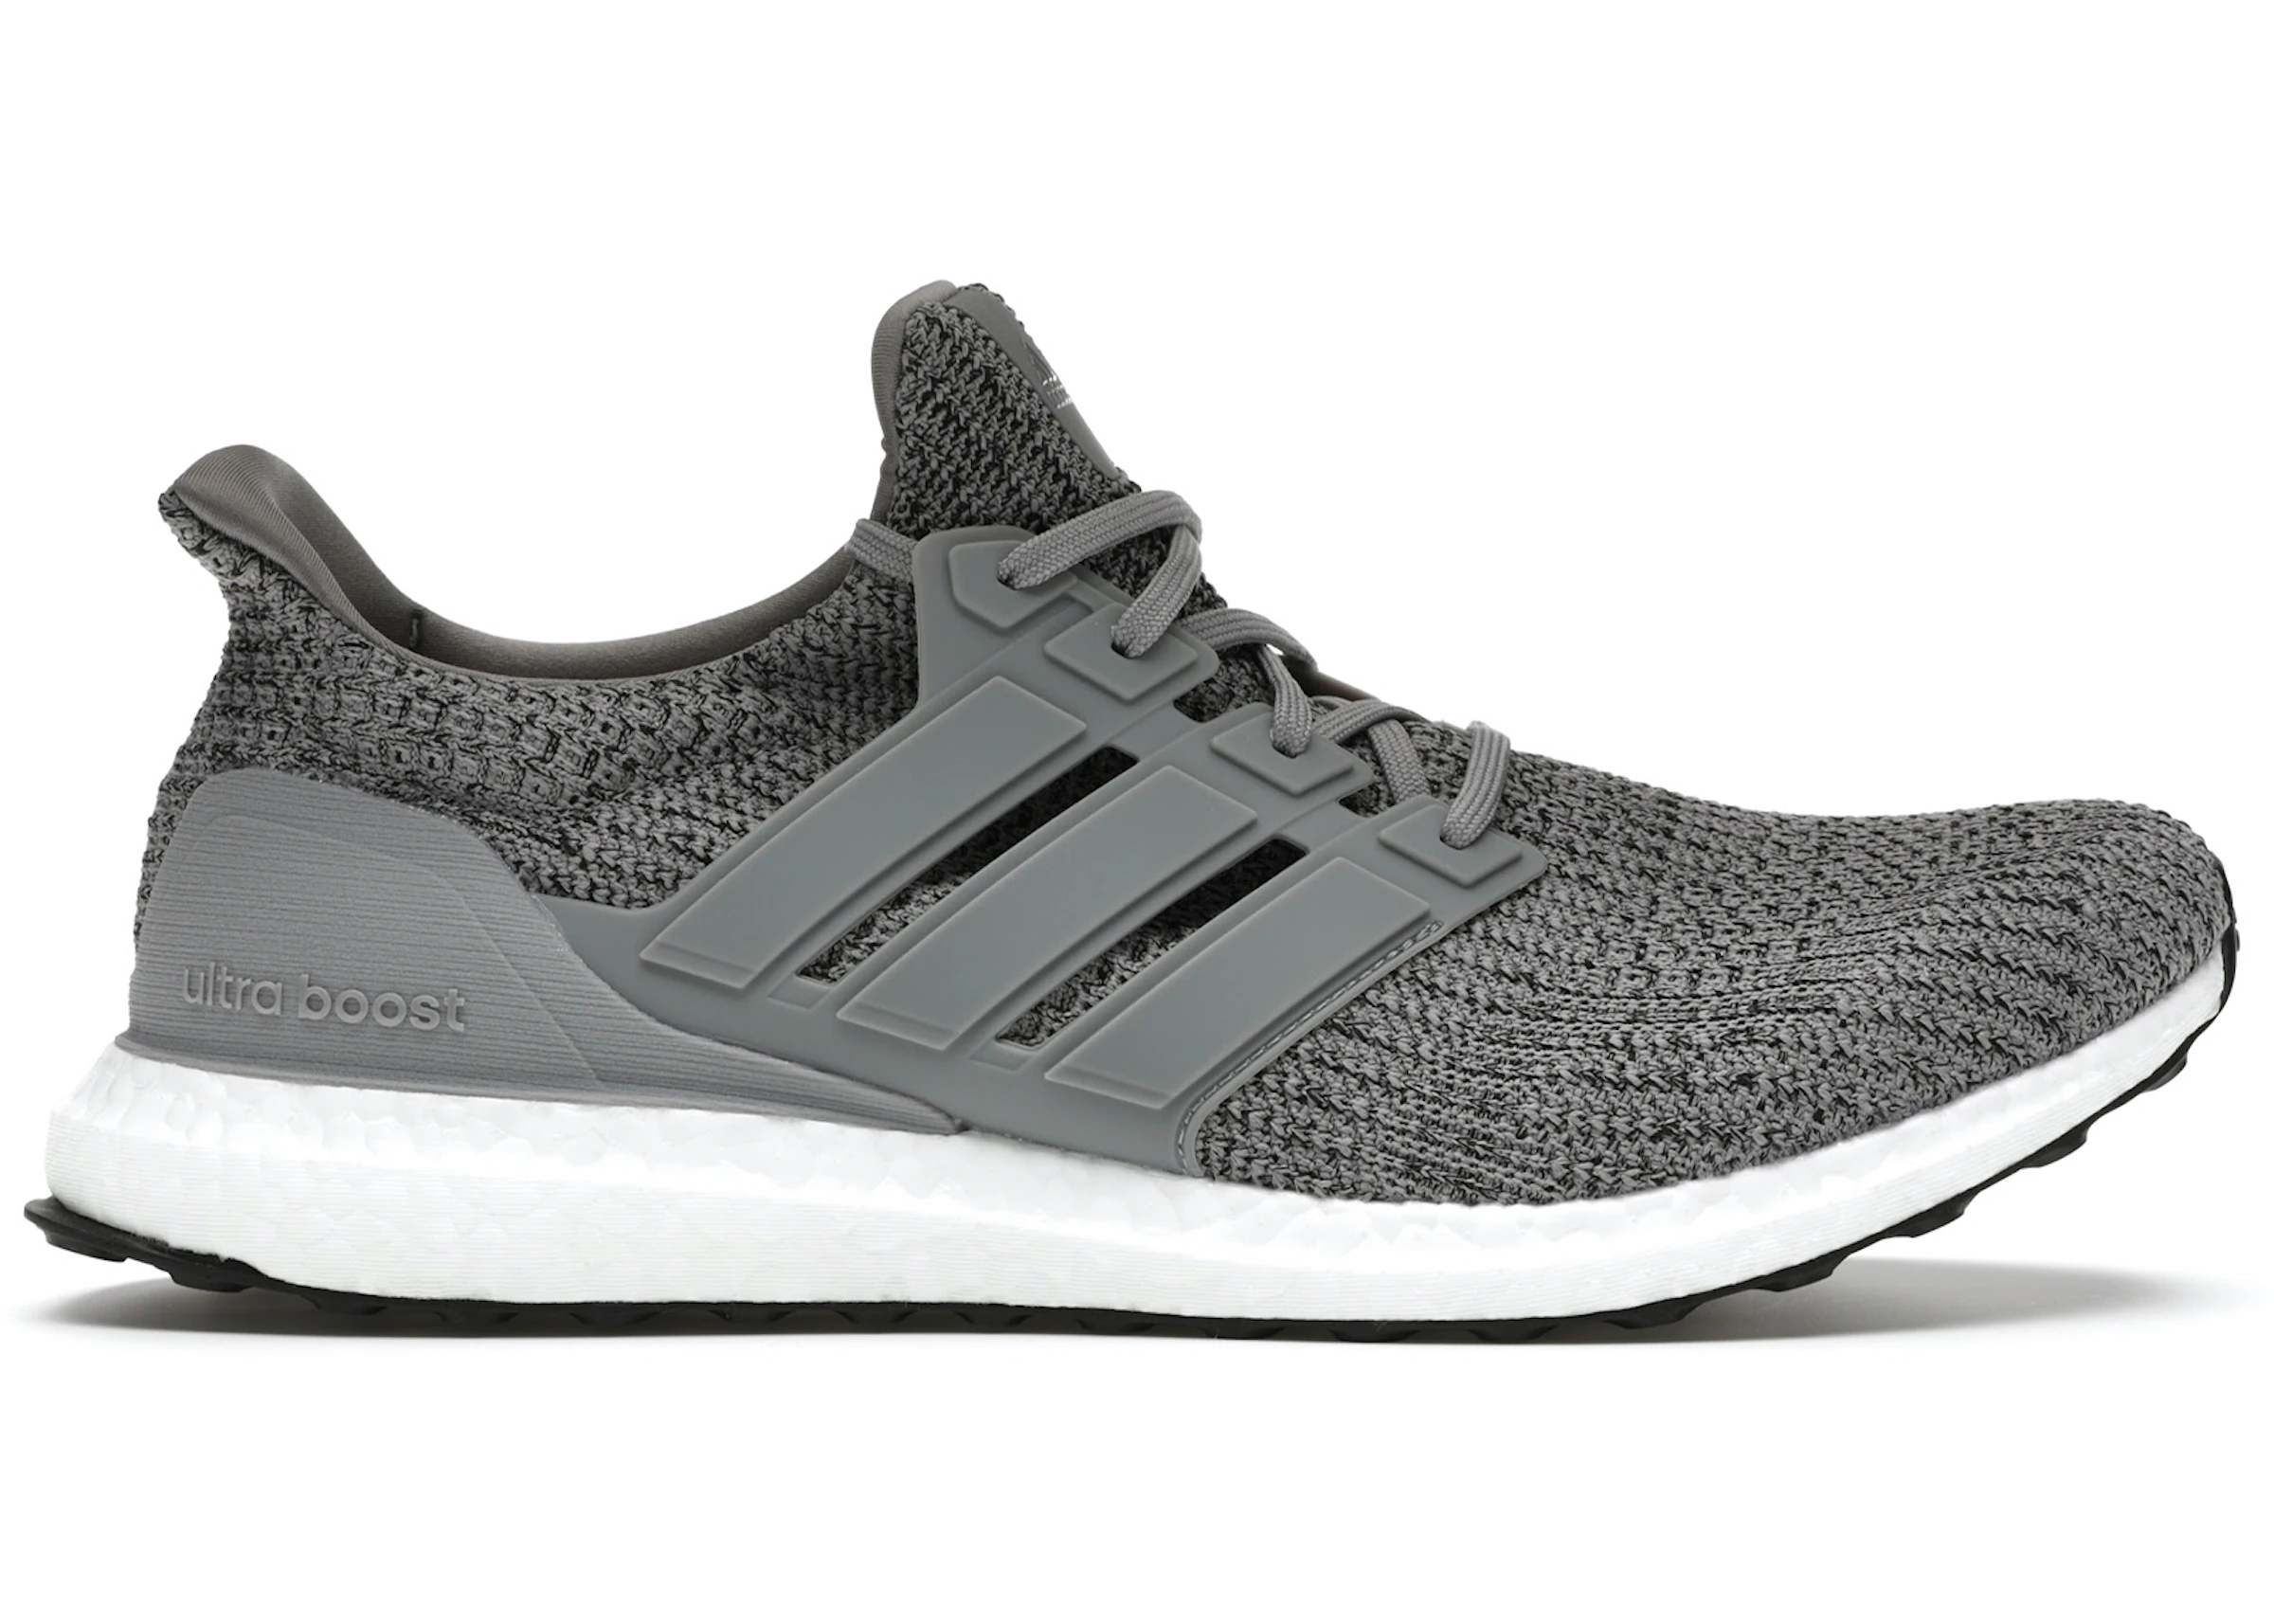 parade Privilege alive Buy adidas Ultra Boost Shoes & New Sneakers - StockX